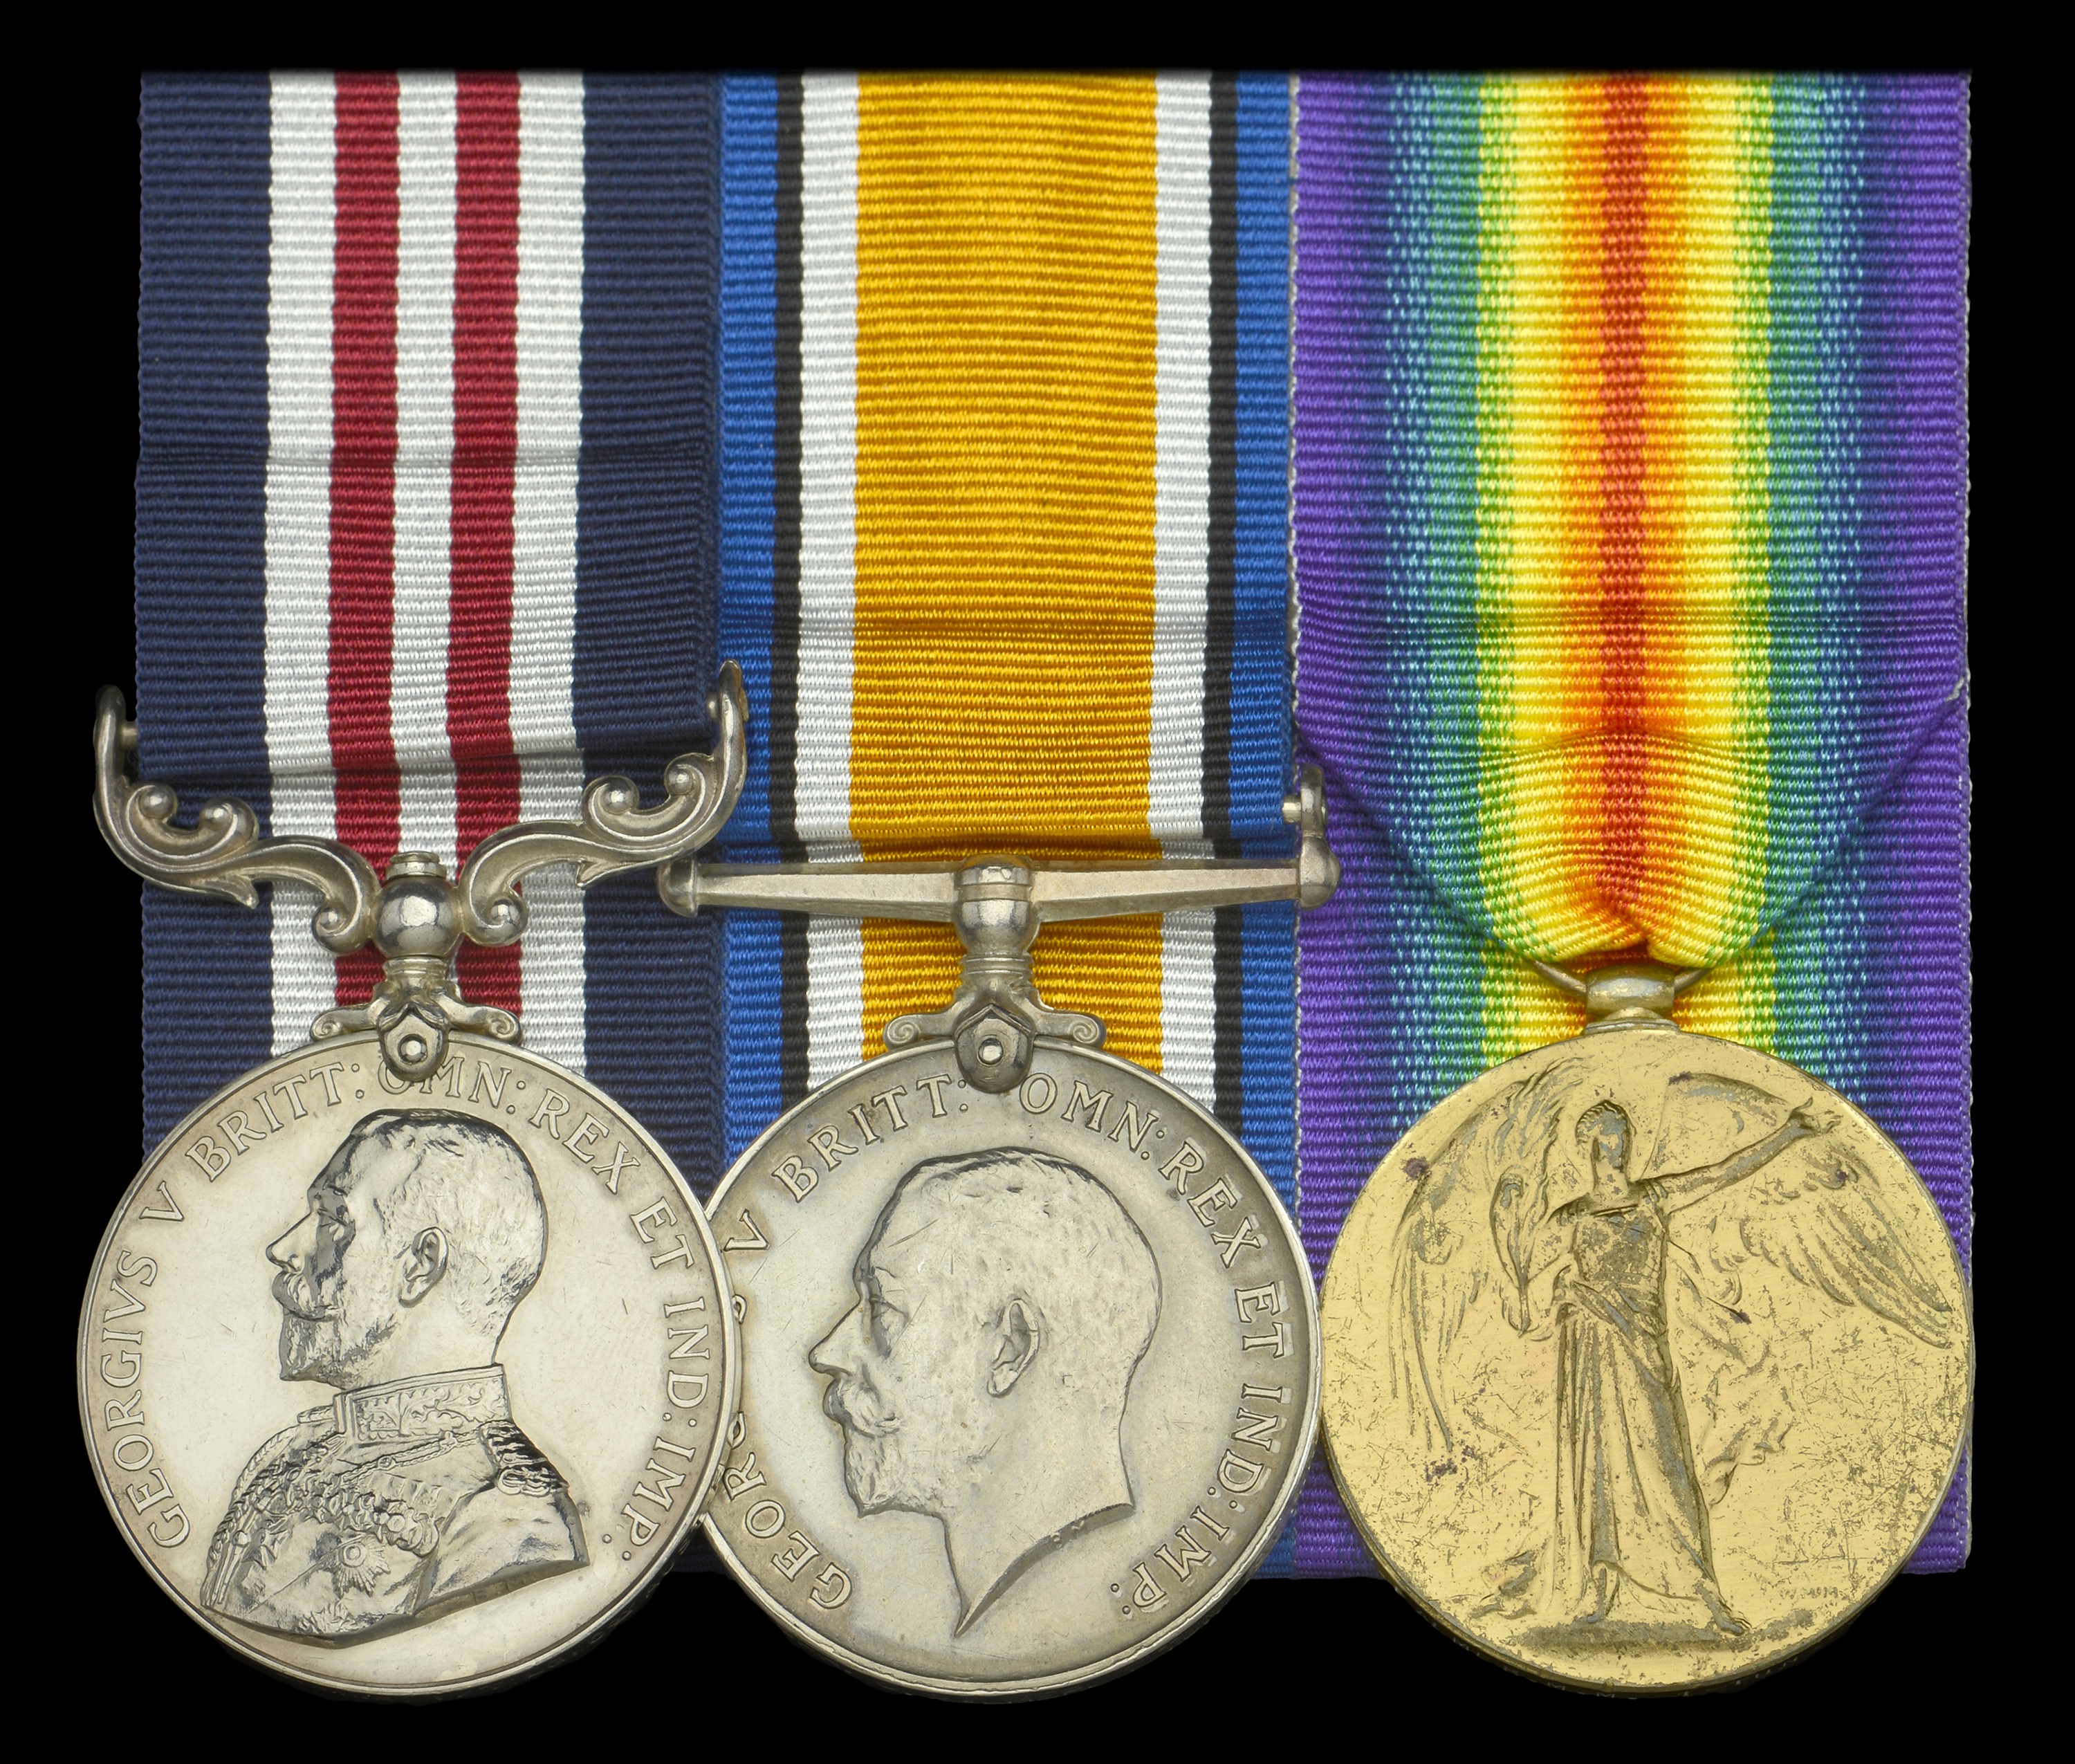 A Great War 1917 'Hill 60, Ypres' M.M. group of three awarded to Sapper O. Palmer, 1st Tunne...